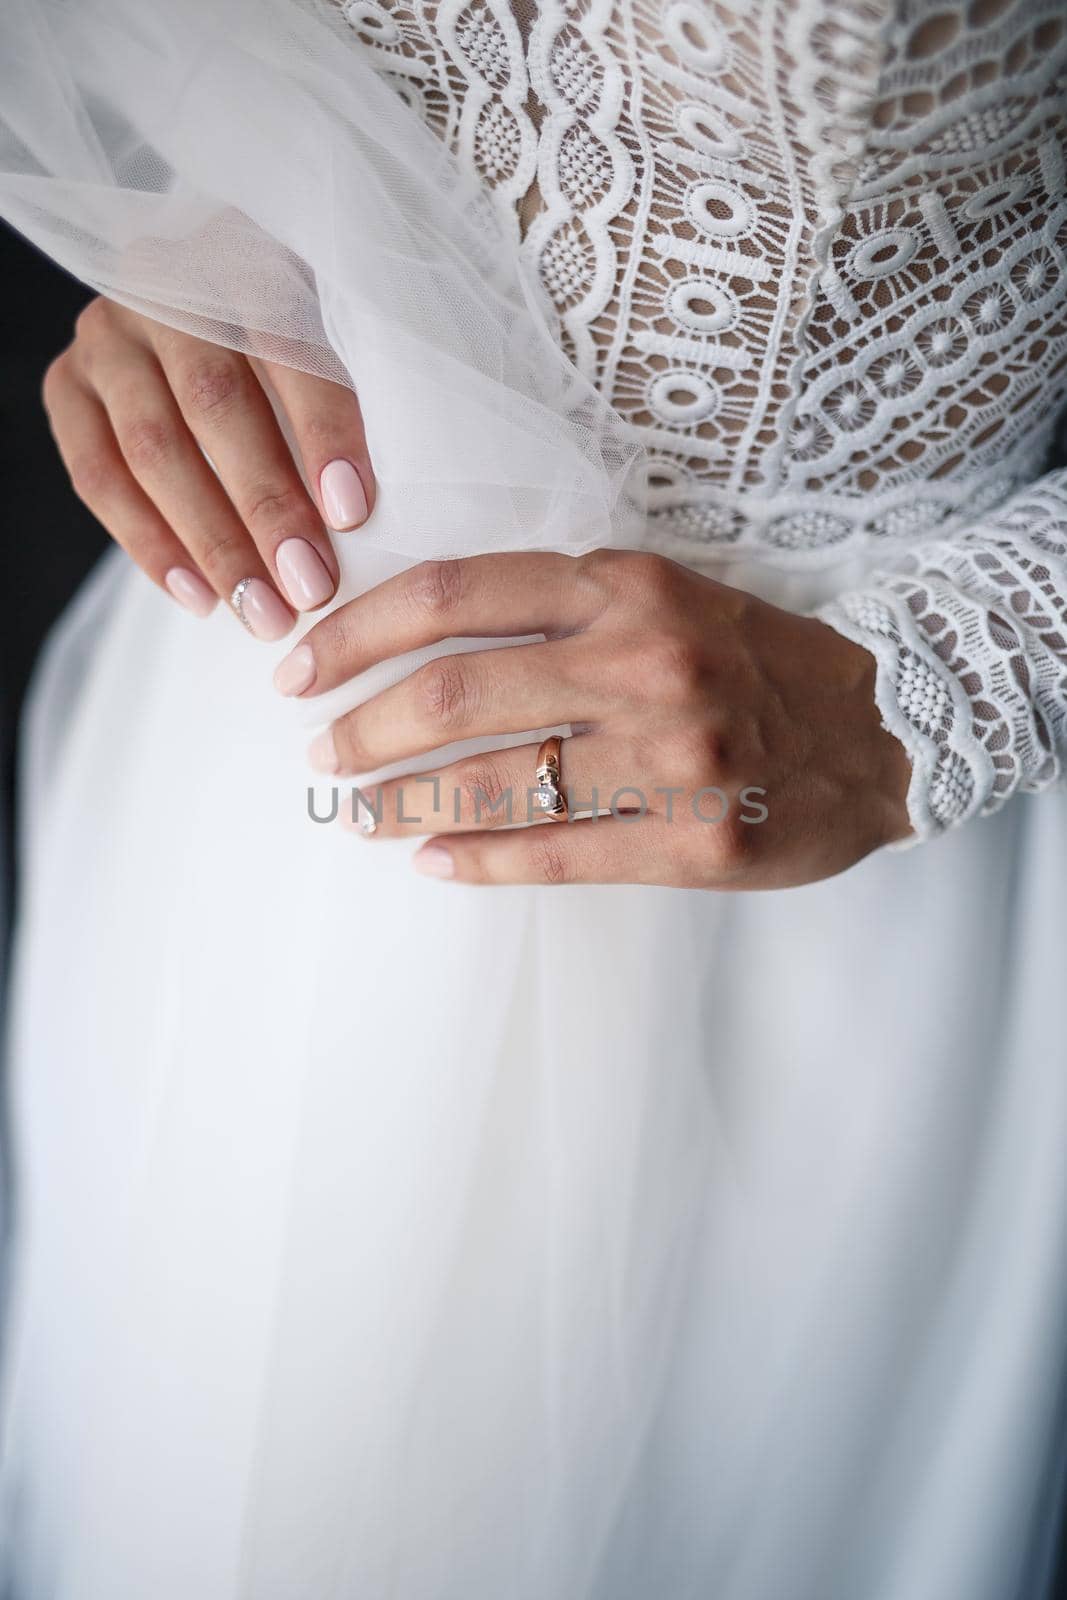 Gentle female hands of the bride with a gold wedding ring on the ring finger by Dmitrytph